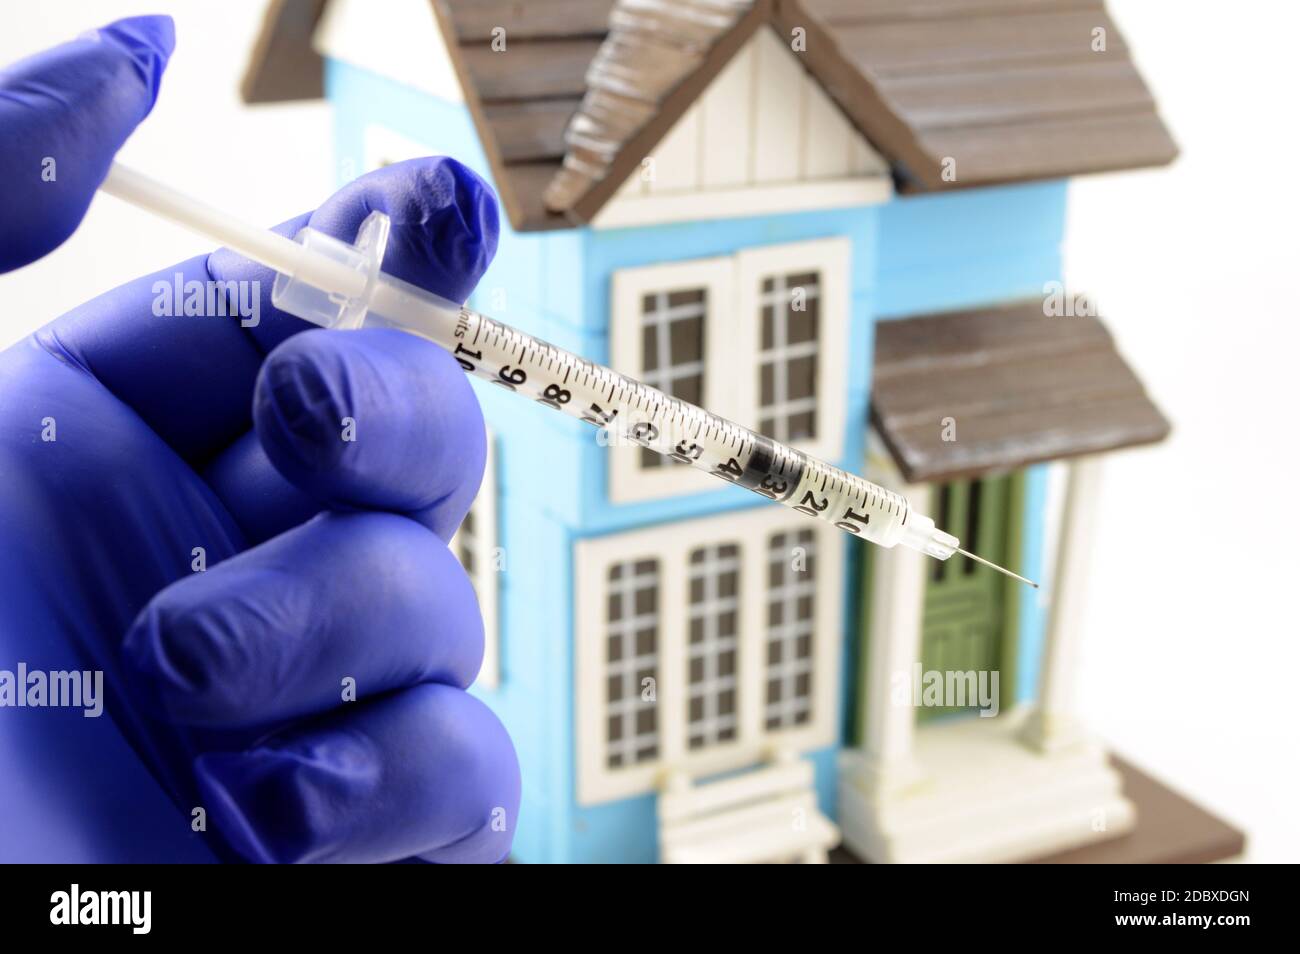 A concept of a medical professional preparing a vaccine for quarantine households affected by Covid-19 Coronavirus edpidemic. Stock Photo